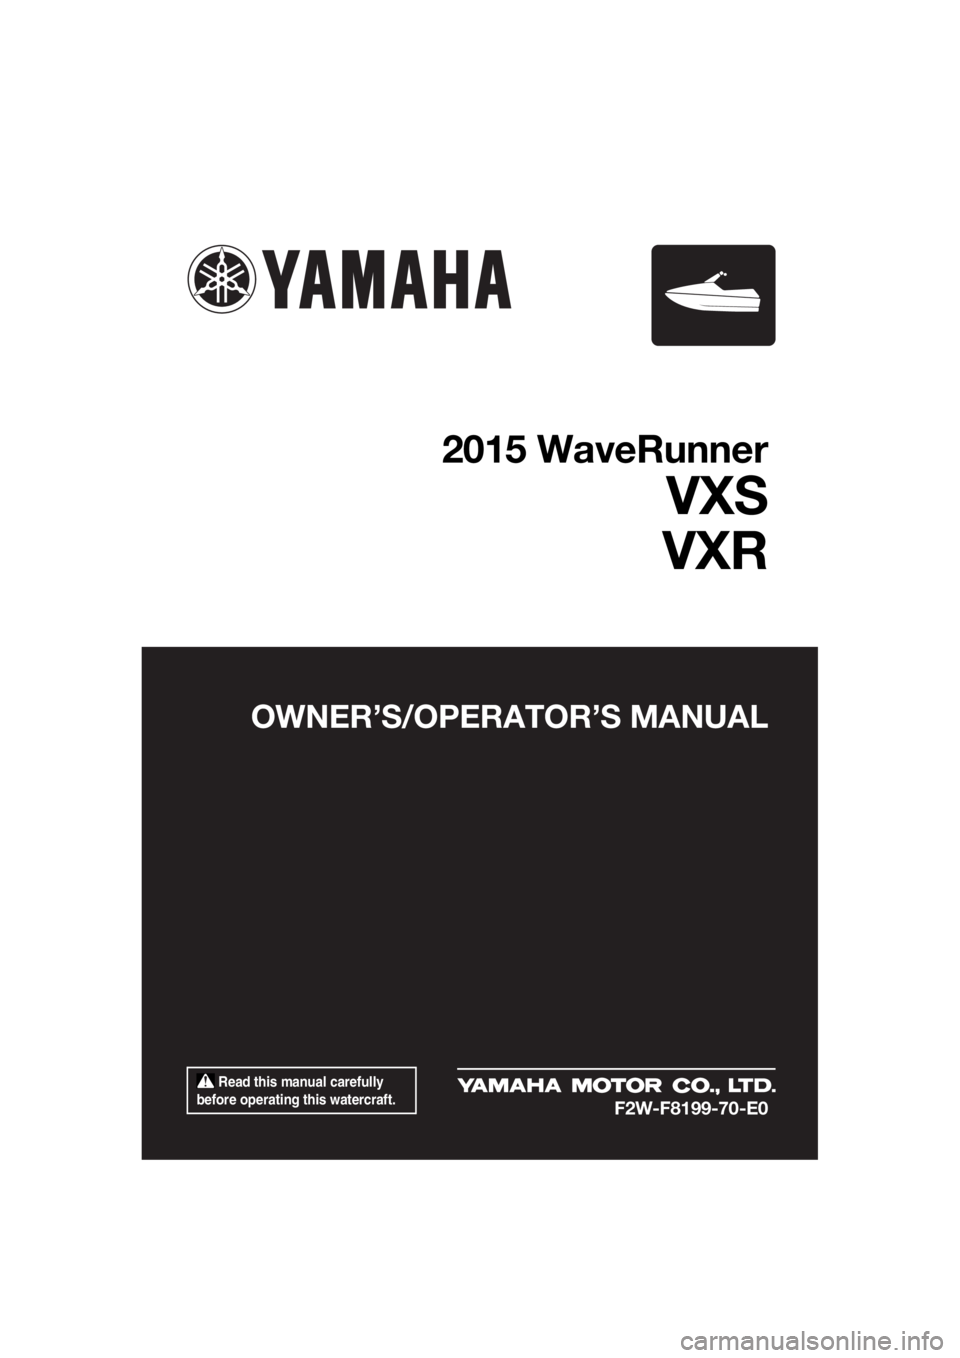 YAMAHA VXS 2015  Owners Manual  Read this manual carefully 
before operating this watercraft.
OWNER’S/OPERATOR’S MANUAL
2015 WaveRunner
VXS
VXR
F2W-F8199-70-E0
UF2W70E0.book  Page 1  Tuesday, December 8, 2015  9:03 AM 